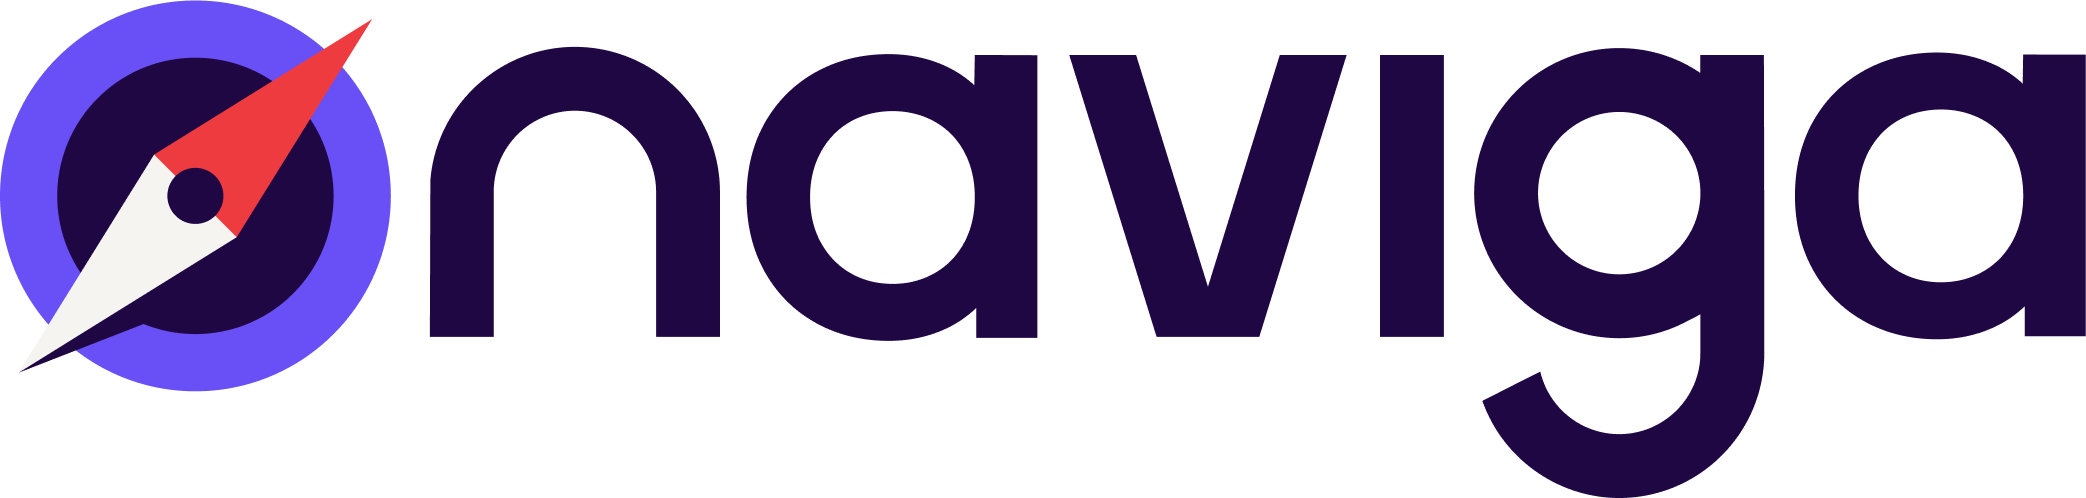 Endpoint Consulting Client - Naviga